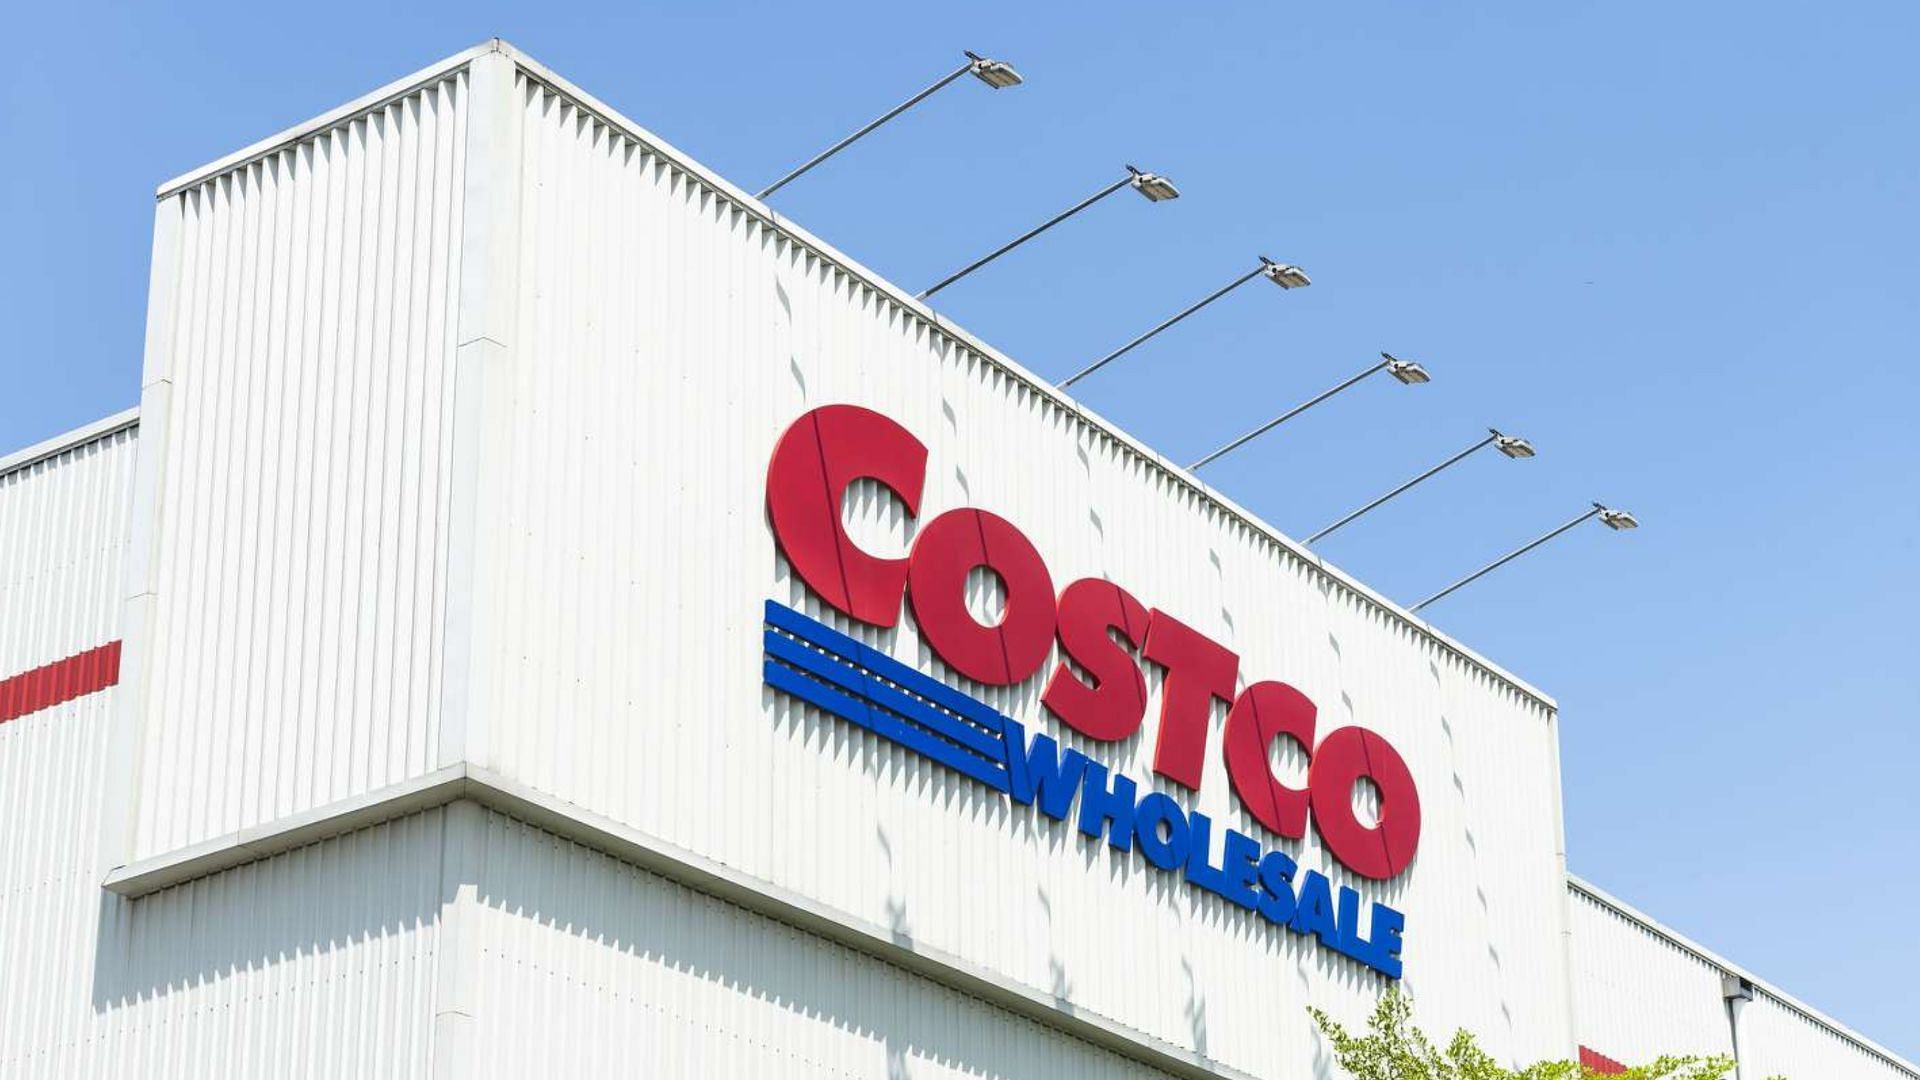 food items have been experiencing occasional hikes at Costco stores across the country (Image via Bing-Jhen Hong/Getty Images)